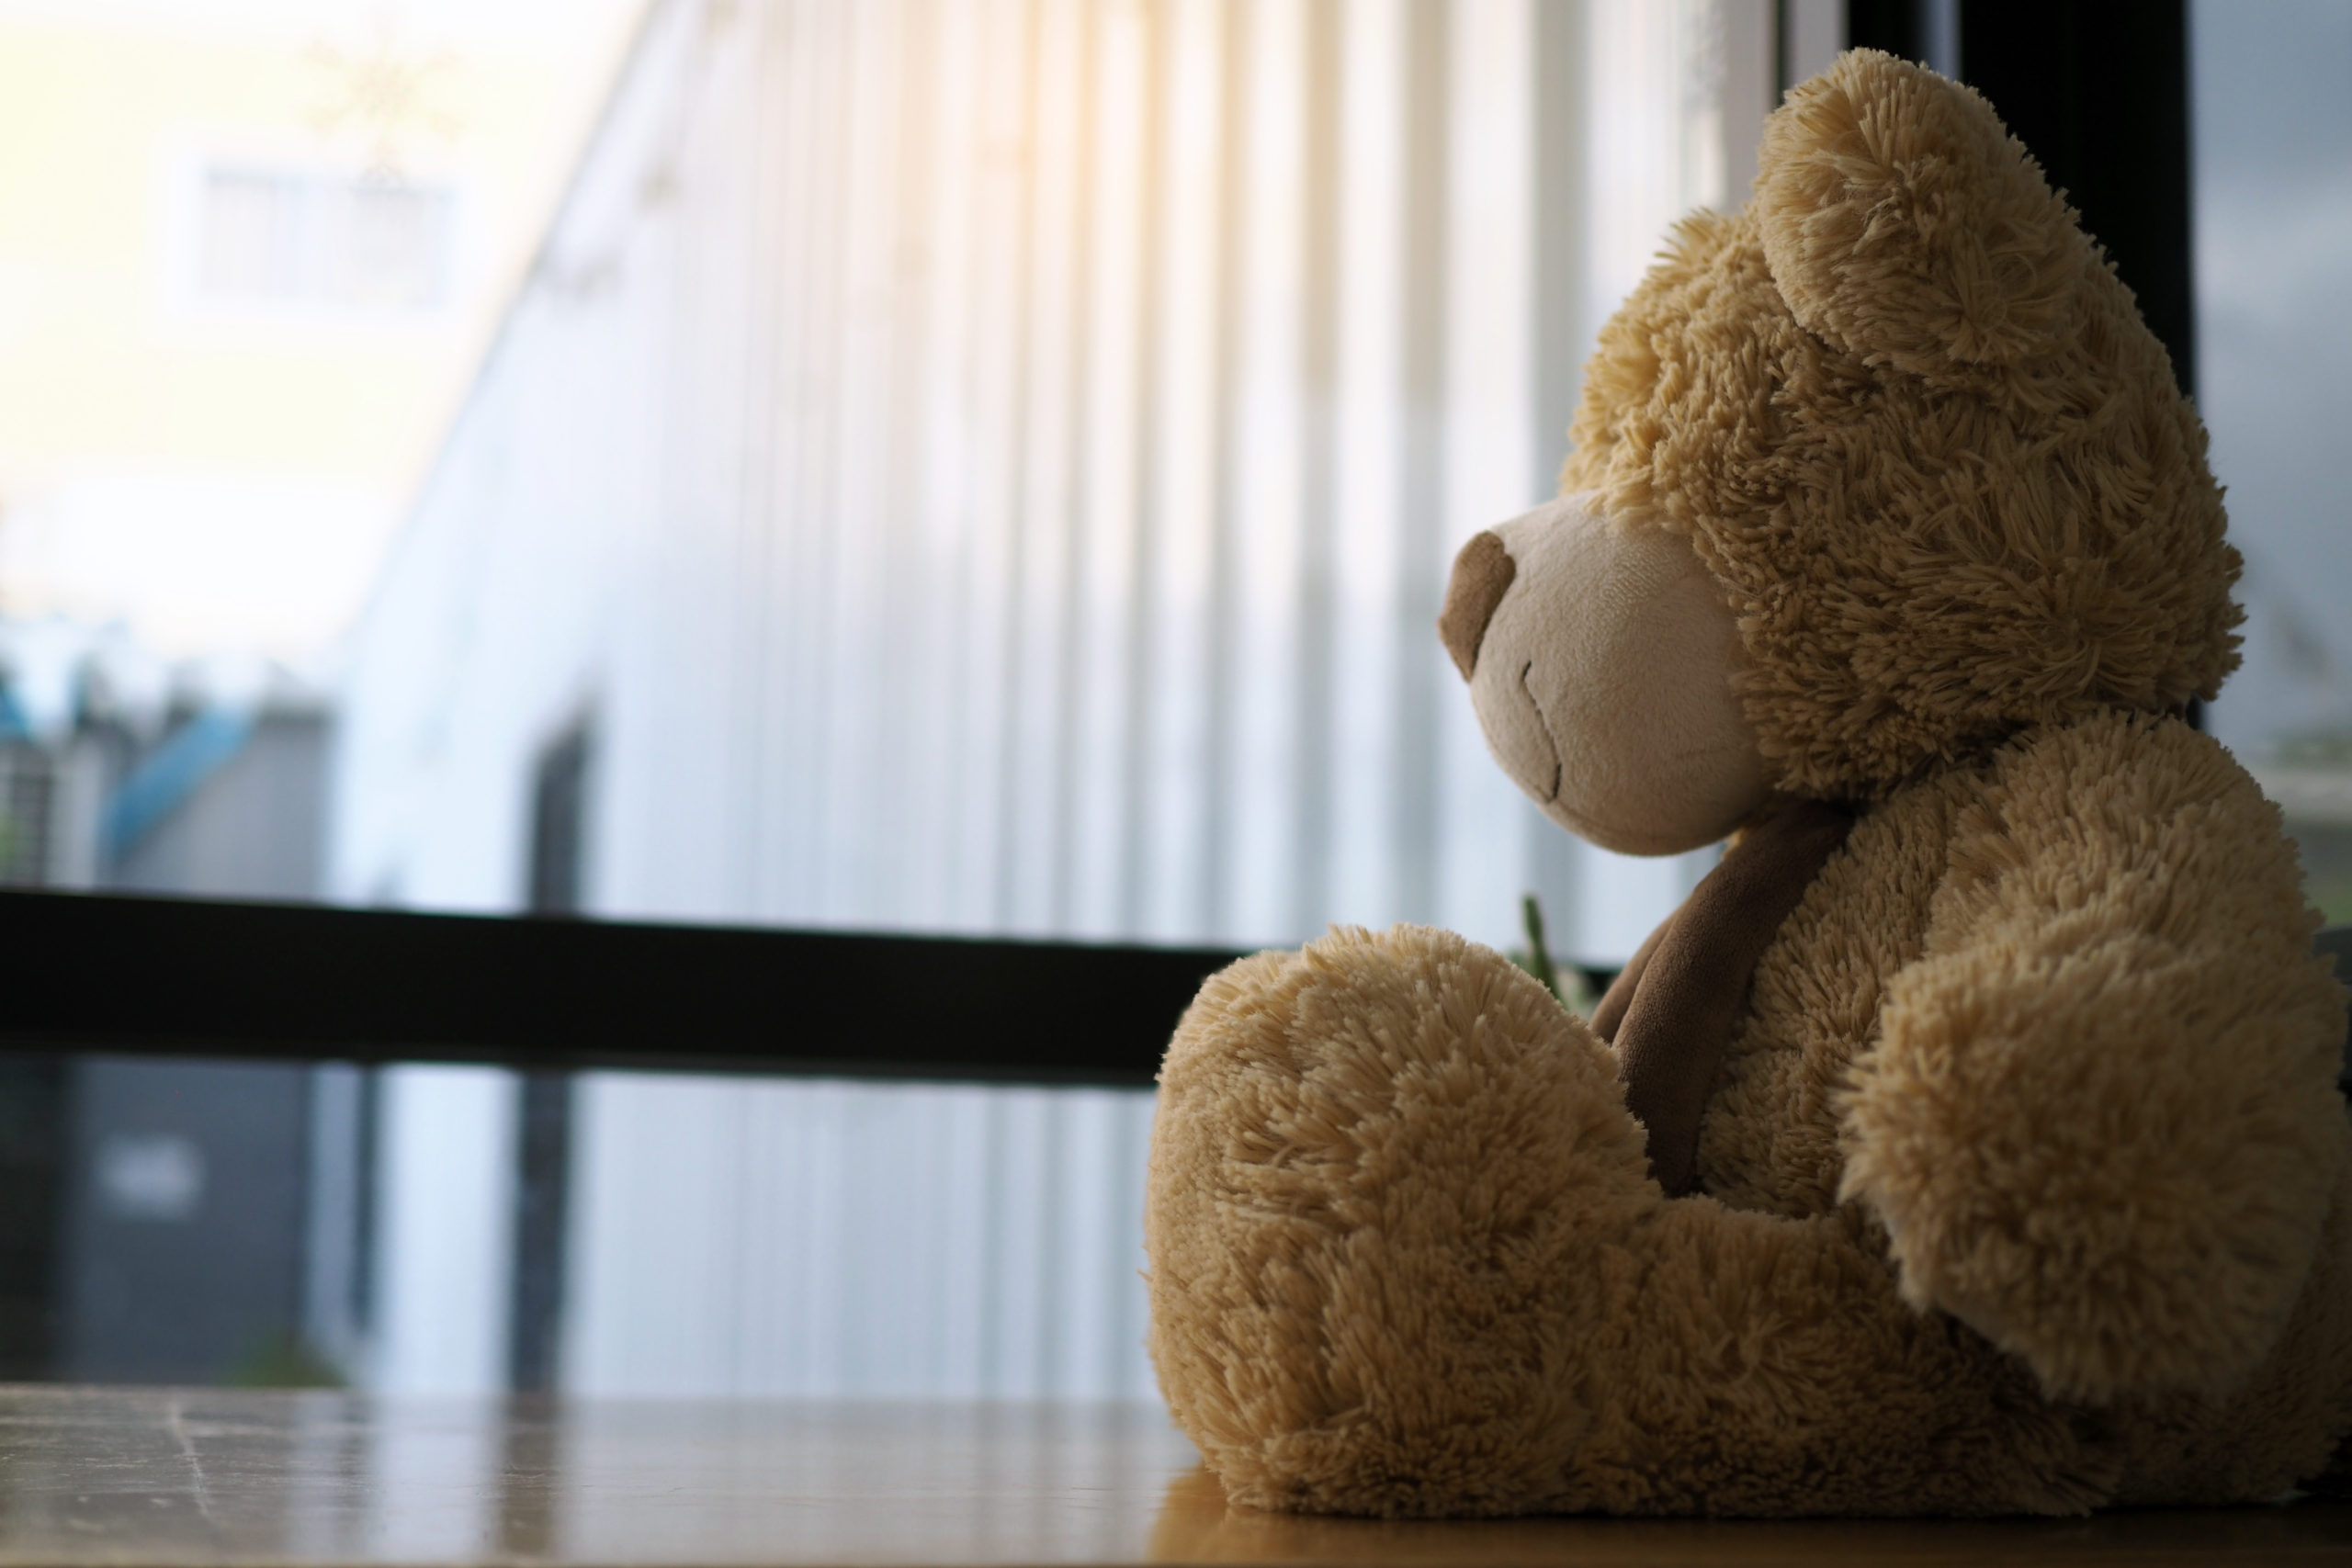 Child concept of sorrow. Teddy bear sitting leaning against the wall of the house alone, look sad and disappointed.